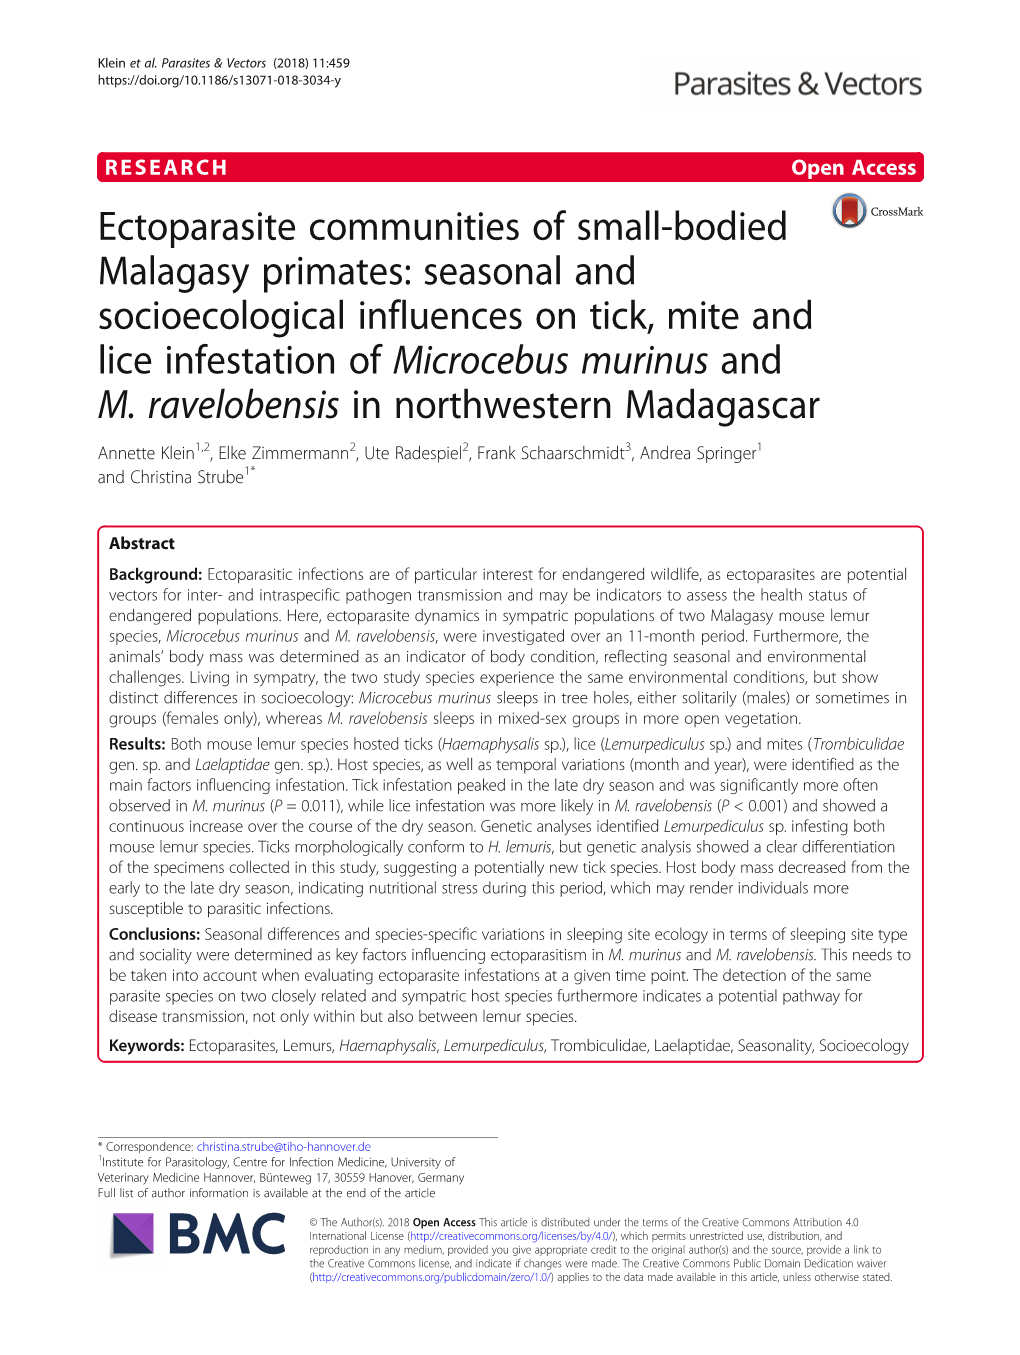 Seasonal and Socioecological Influences on Tick, Mite and Lice Infestation of Microcebus Murinus and M